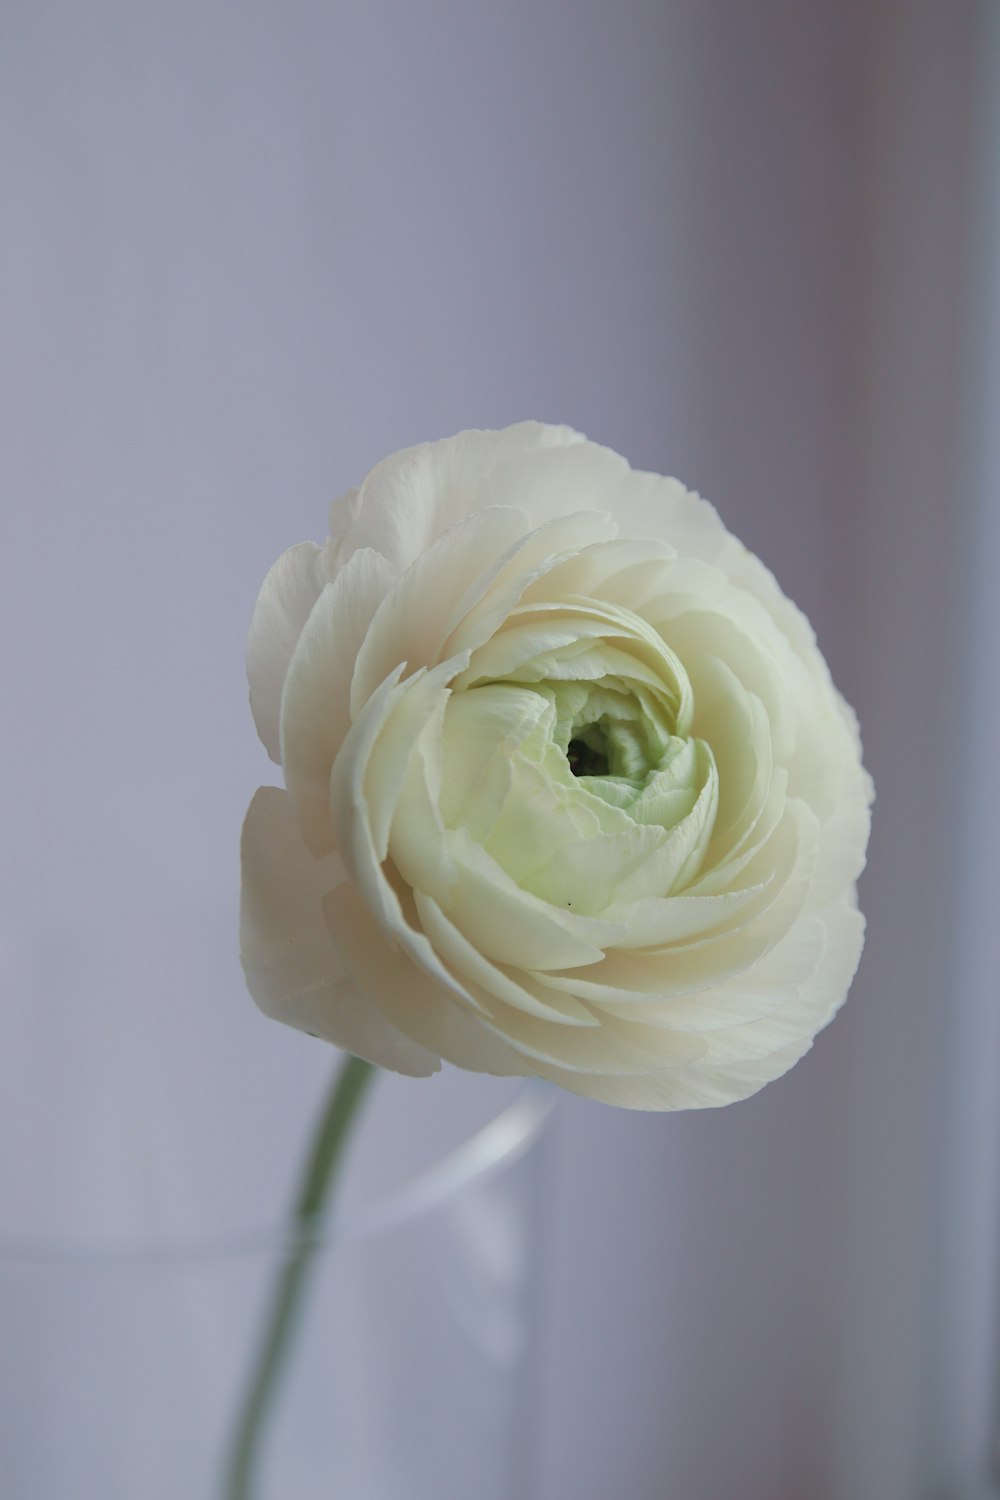 a single white flower in a glass vase